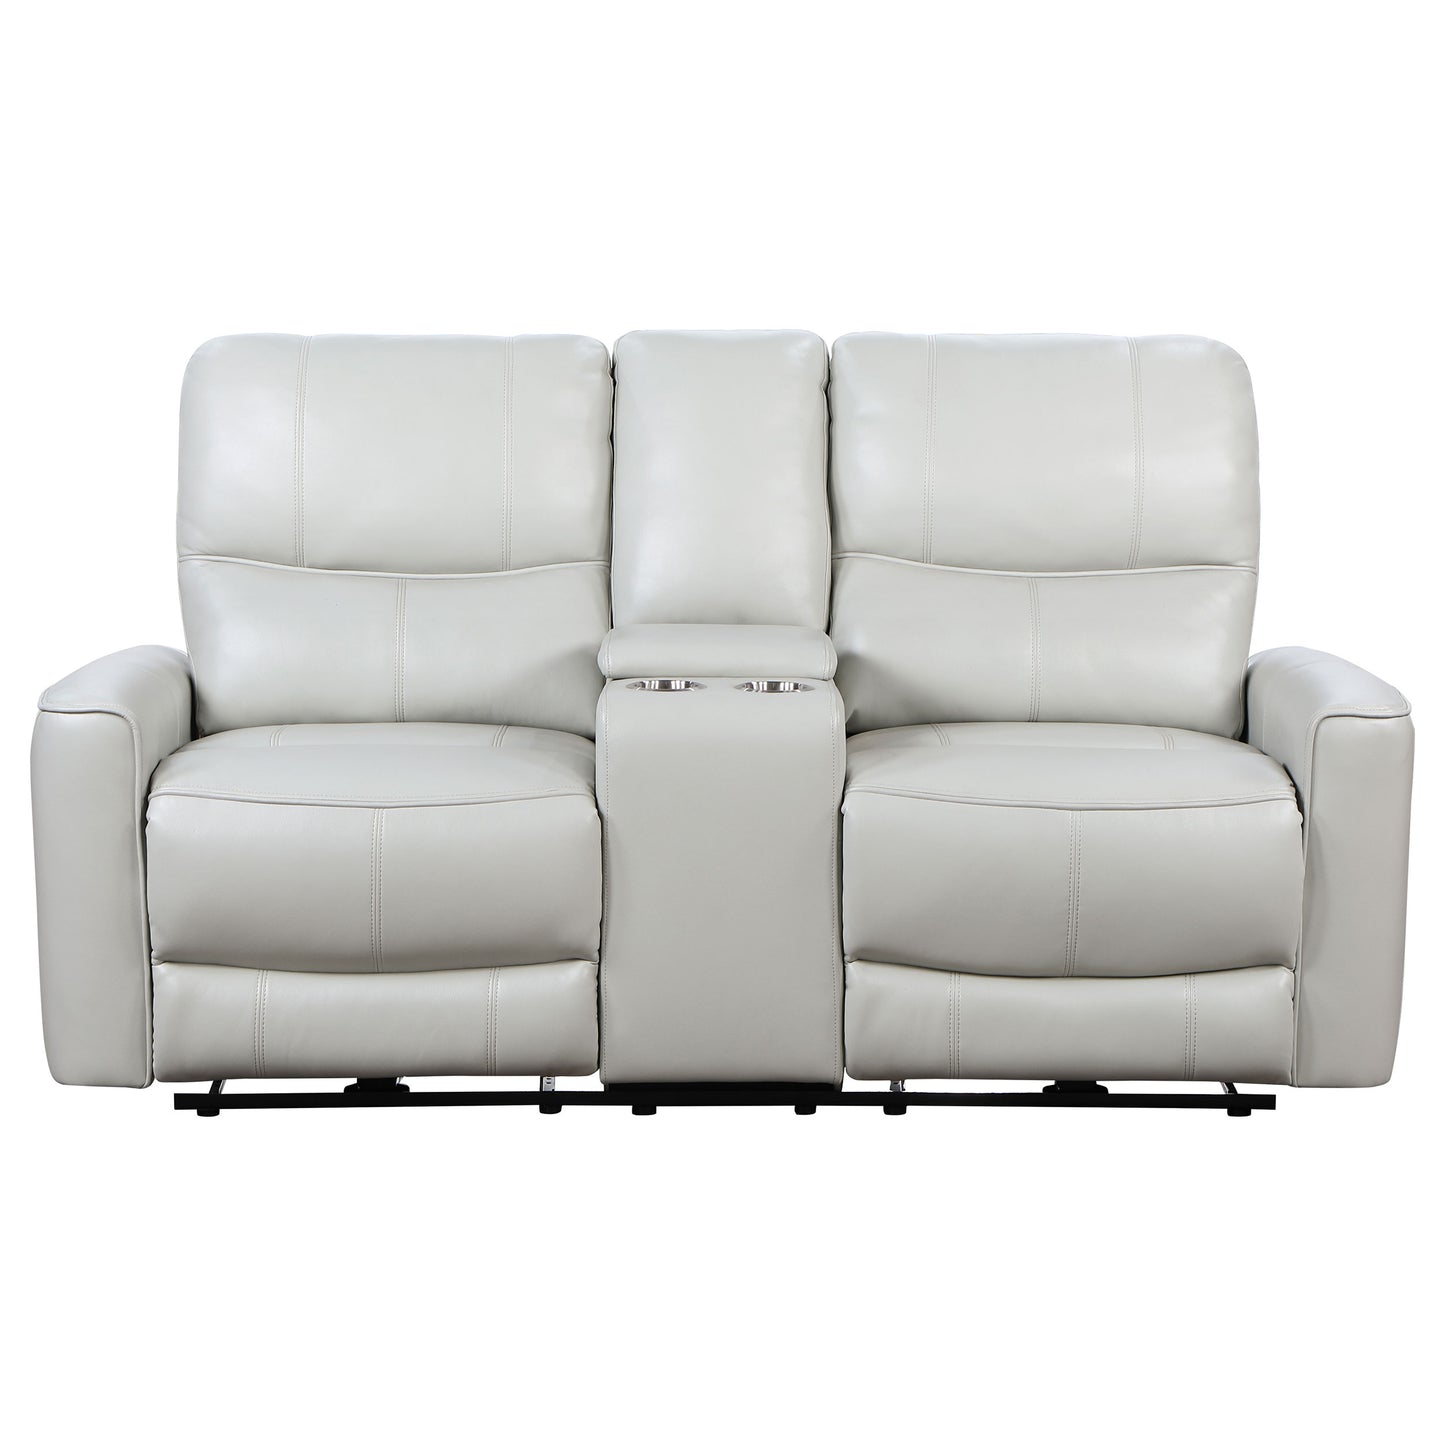 Greenfield Upholstered Power Reclining Loveseat with Console Ivory